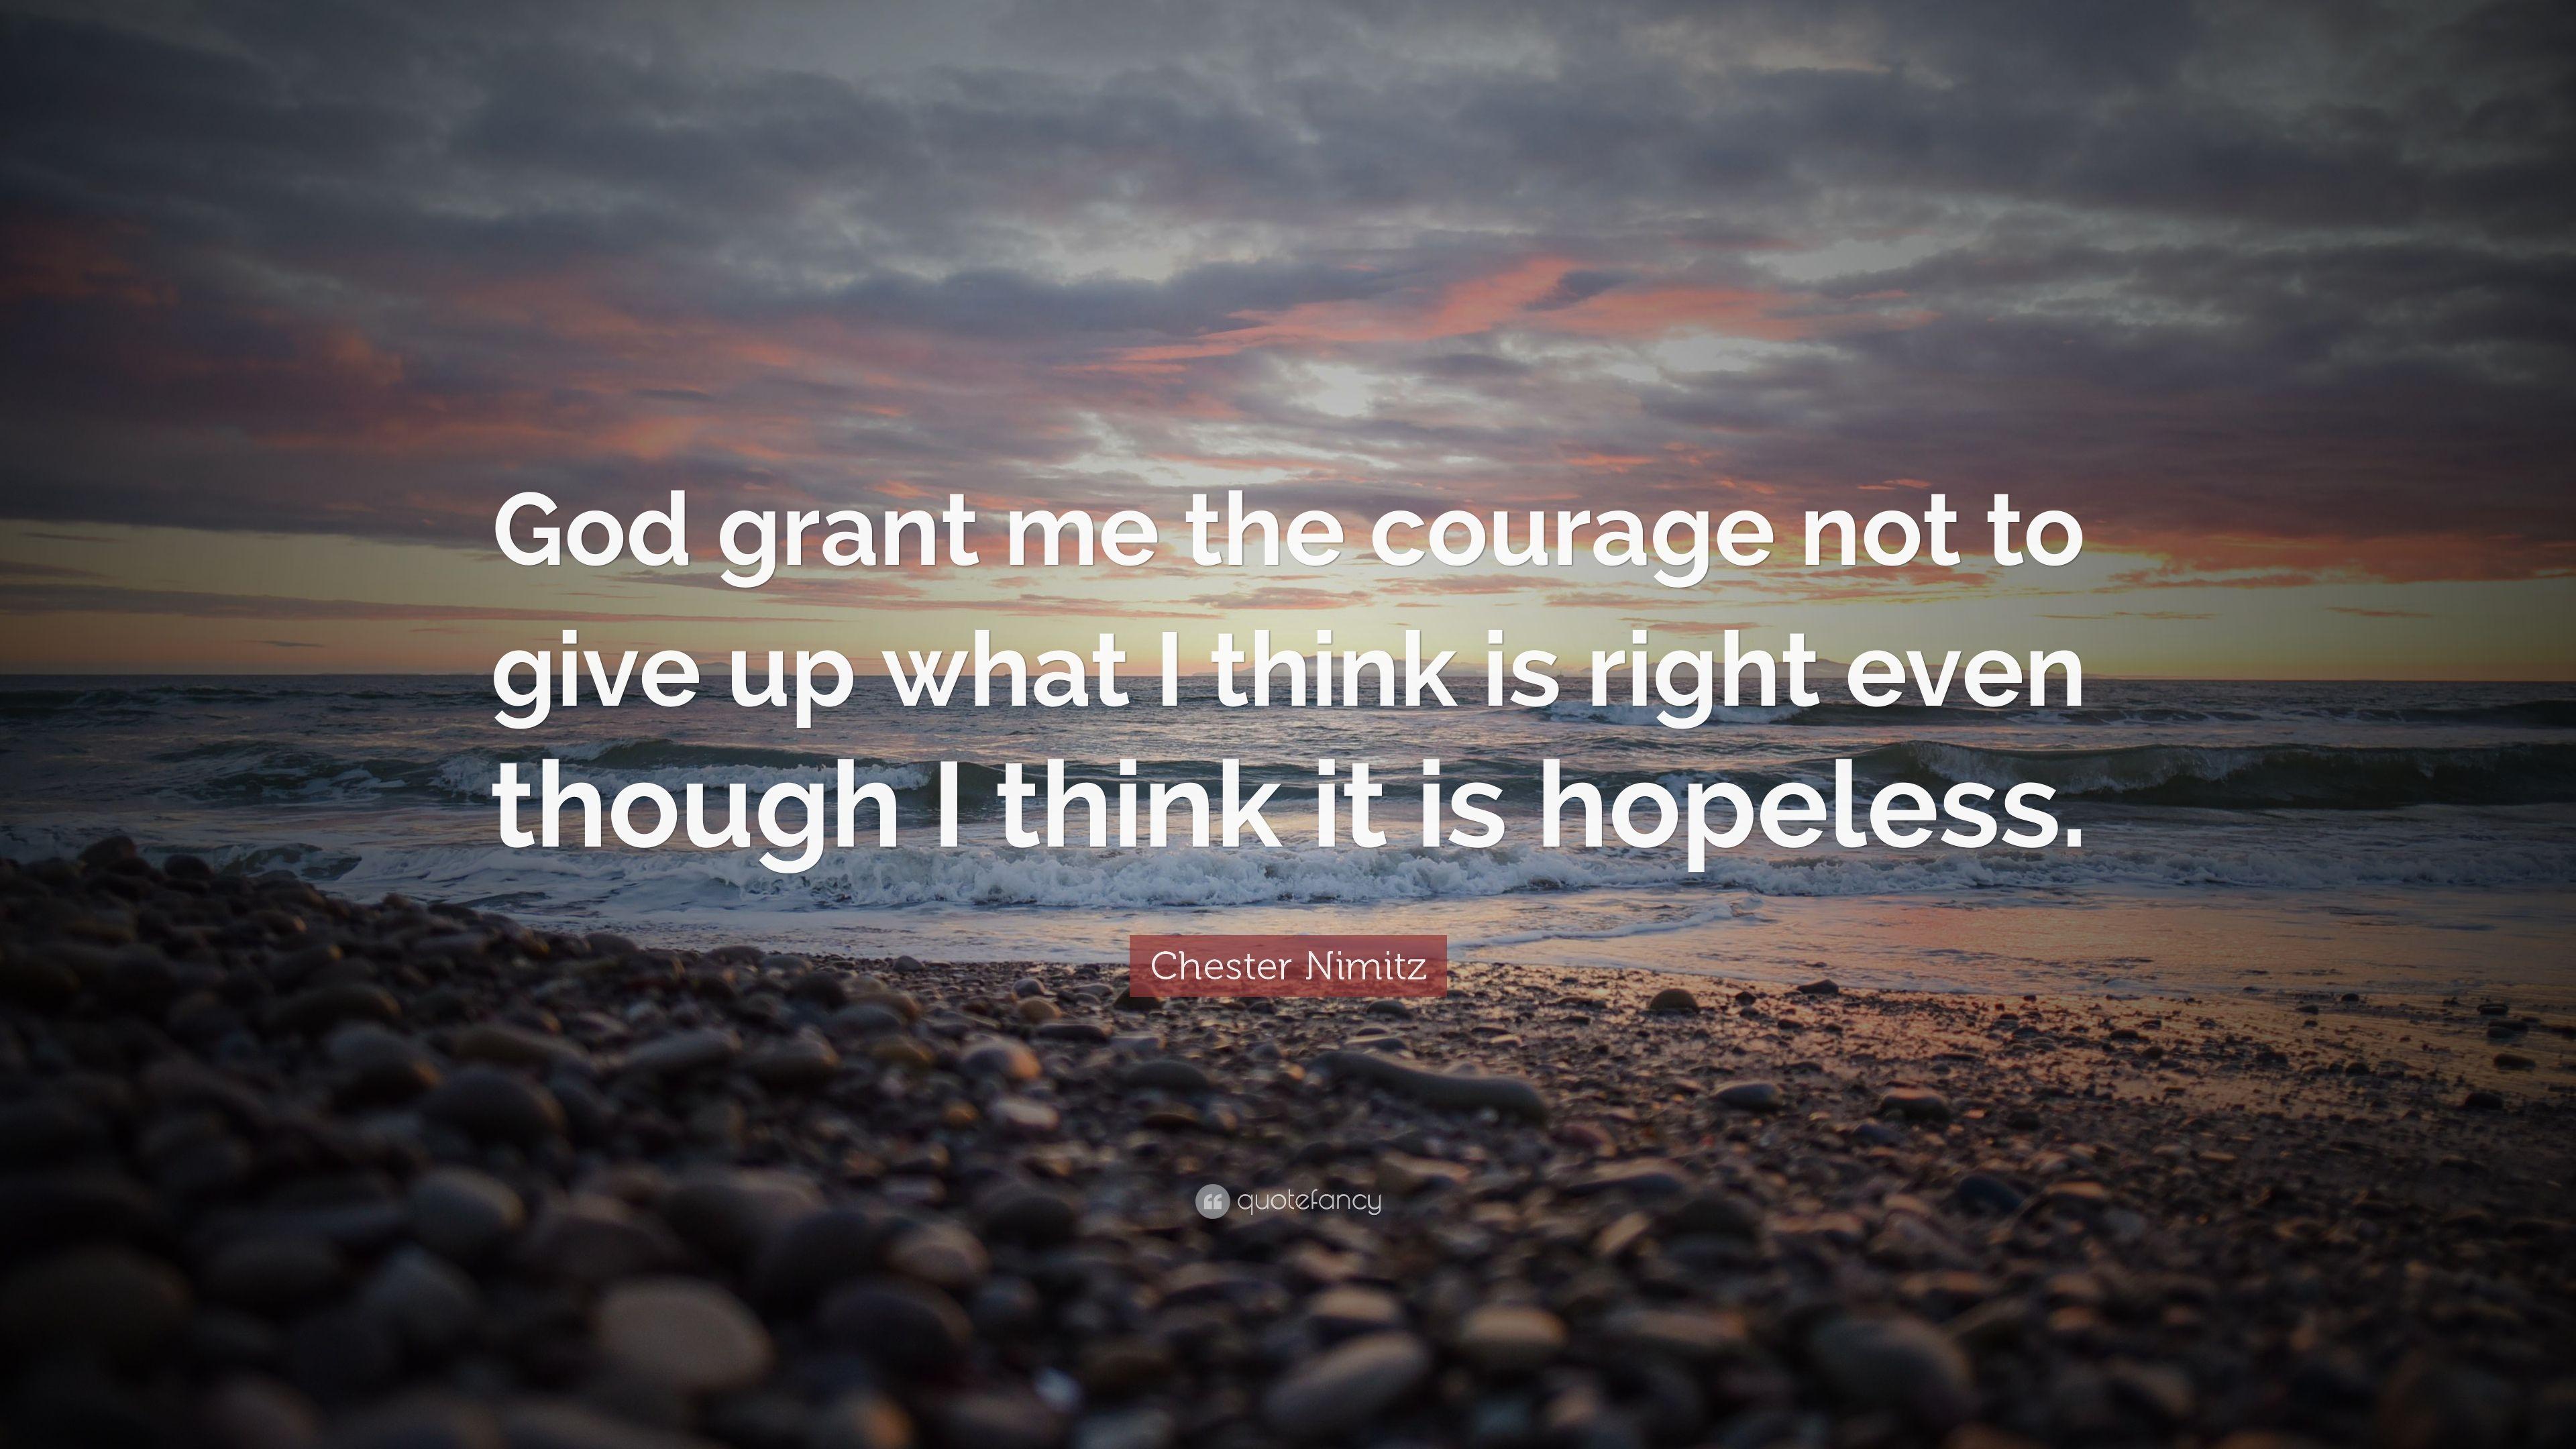 Chester Nimitz Quote: “God grant me the courage not to give up